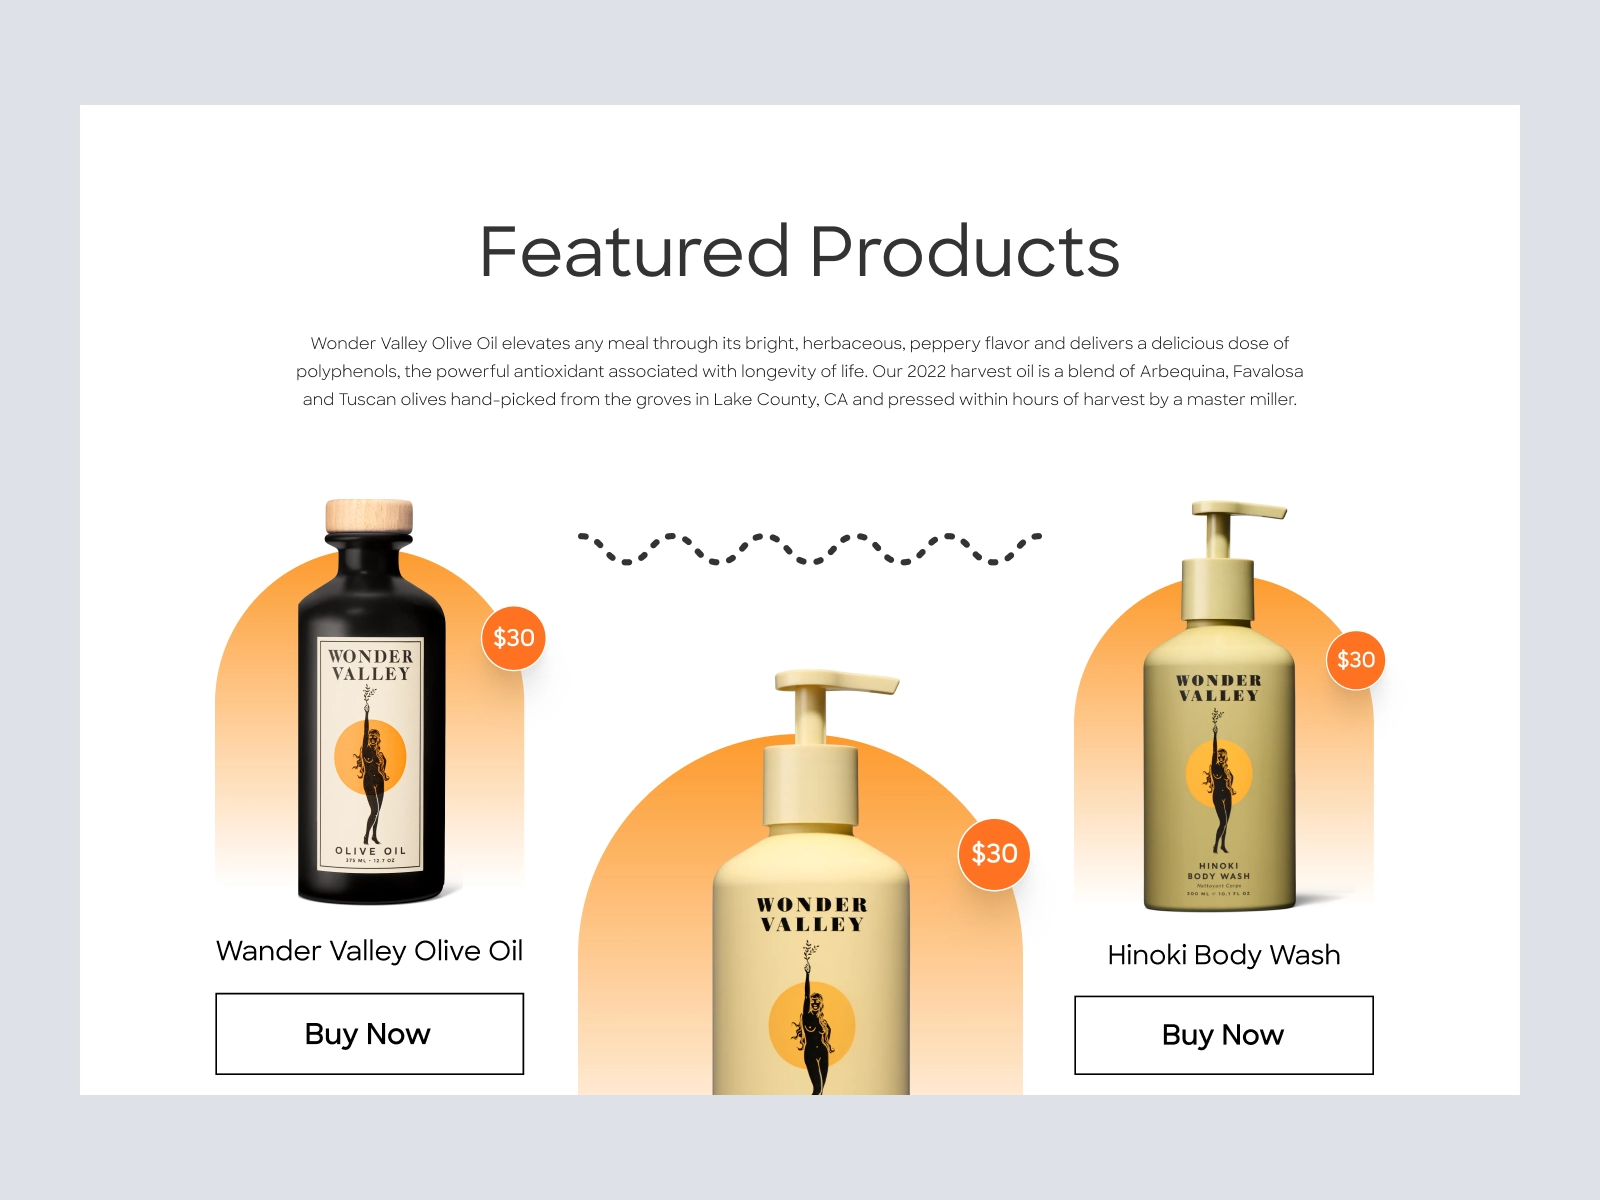 Wonder Valley - Olive Oil Shopify Store Design for Adobe XD - screen 2